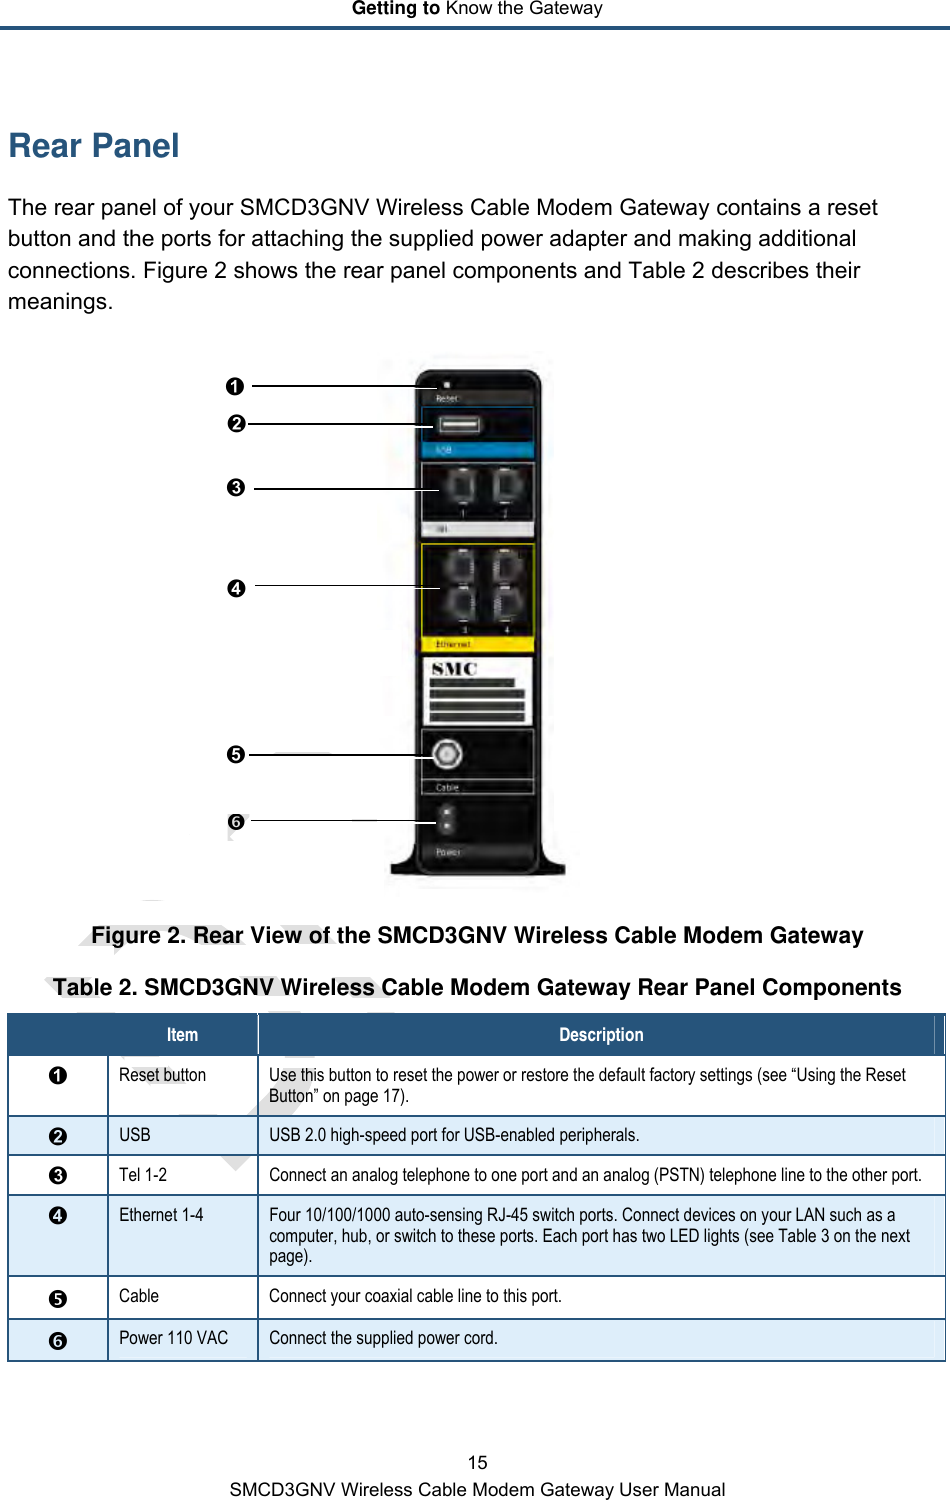 Getting to Know the Gateway 15 SMCD3GNV Wireless Cable Modem Gateway User Manual      Rear Panel The rear panel of your SMCD3GNV Wireless Cable Modem Gateway contains a reset button and the ports for attaching the supplied power adapter and making additional connections. Figure 2 shows the rear panel components and Table 2 describes their meanings.  Figure 2. Rear View of the SMCD3GNV Wireless Cable Modem Gateway Table 2. SMCD3GNV Wireless Cable Modem Gateway Rear Panel Components  Item  Description  Reset button  Use this button to reset the power or restore the default factory settings (see “Using the Reset Button” on page 17).  USB  USB 2.0 high-speed port for USB-enabled peripherals.  Tel 1-2  Connect an analog telephone to one port and an analog (PSTN) telephone line to the other port.  Ethernet 1-4  Four 10/100/1000 auto-sensing RJ-45 switch ports. Connect devices on your LAN such as a computer, hub, or switch to these ports. Each port has two LED lights (see Table 3 on the next page).  Cable  Connect your coaxial cable line to this port.  Power 110 VAC  Connect the supplied power cord.   